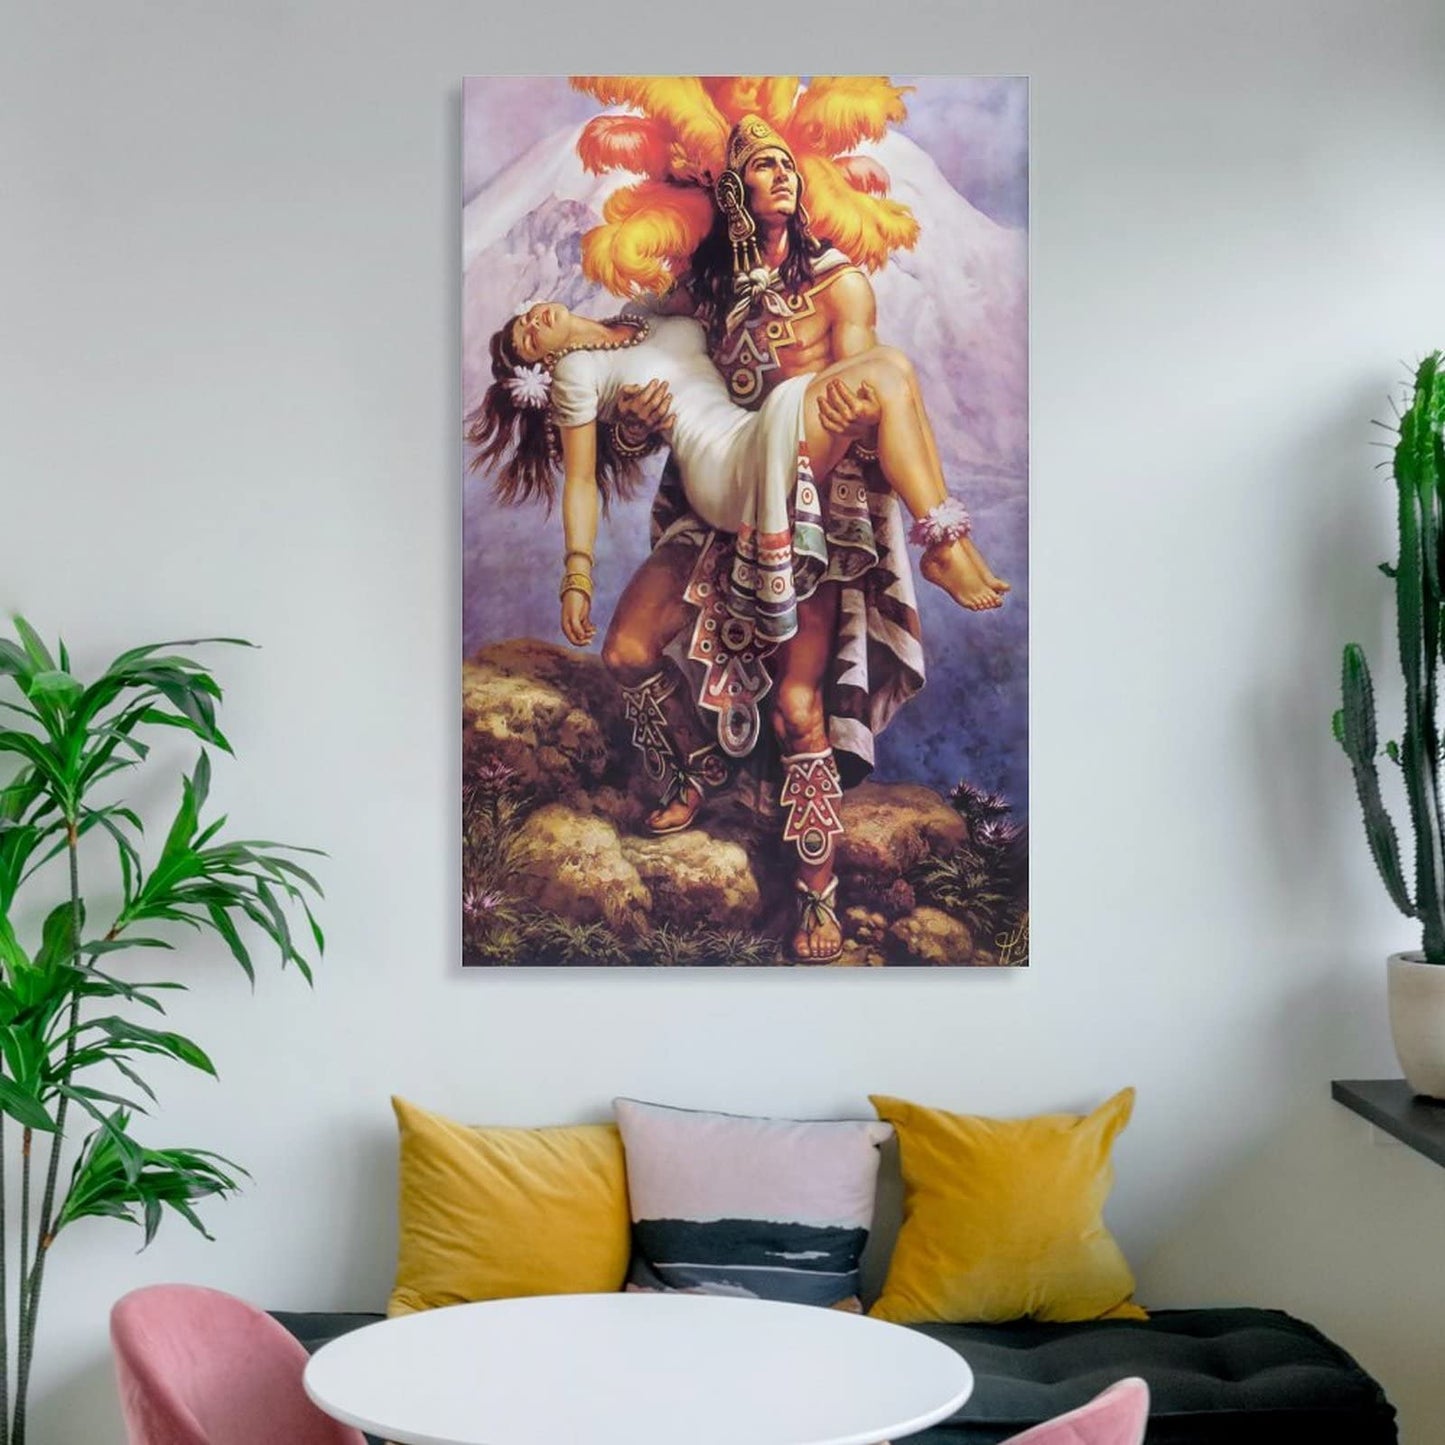 Aztec Warrior and Princess Poster Mexican Folk Mythology Canvas Wall Art Decorative Painting Living Room Decor Posters Bedroom Prints 08x12inch(20x30cm), Unframed